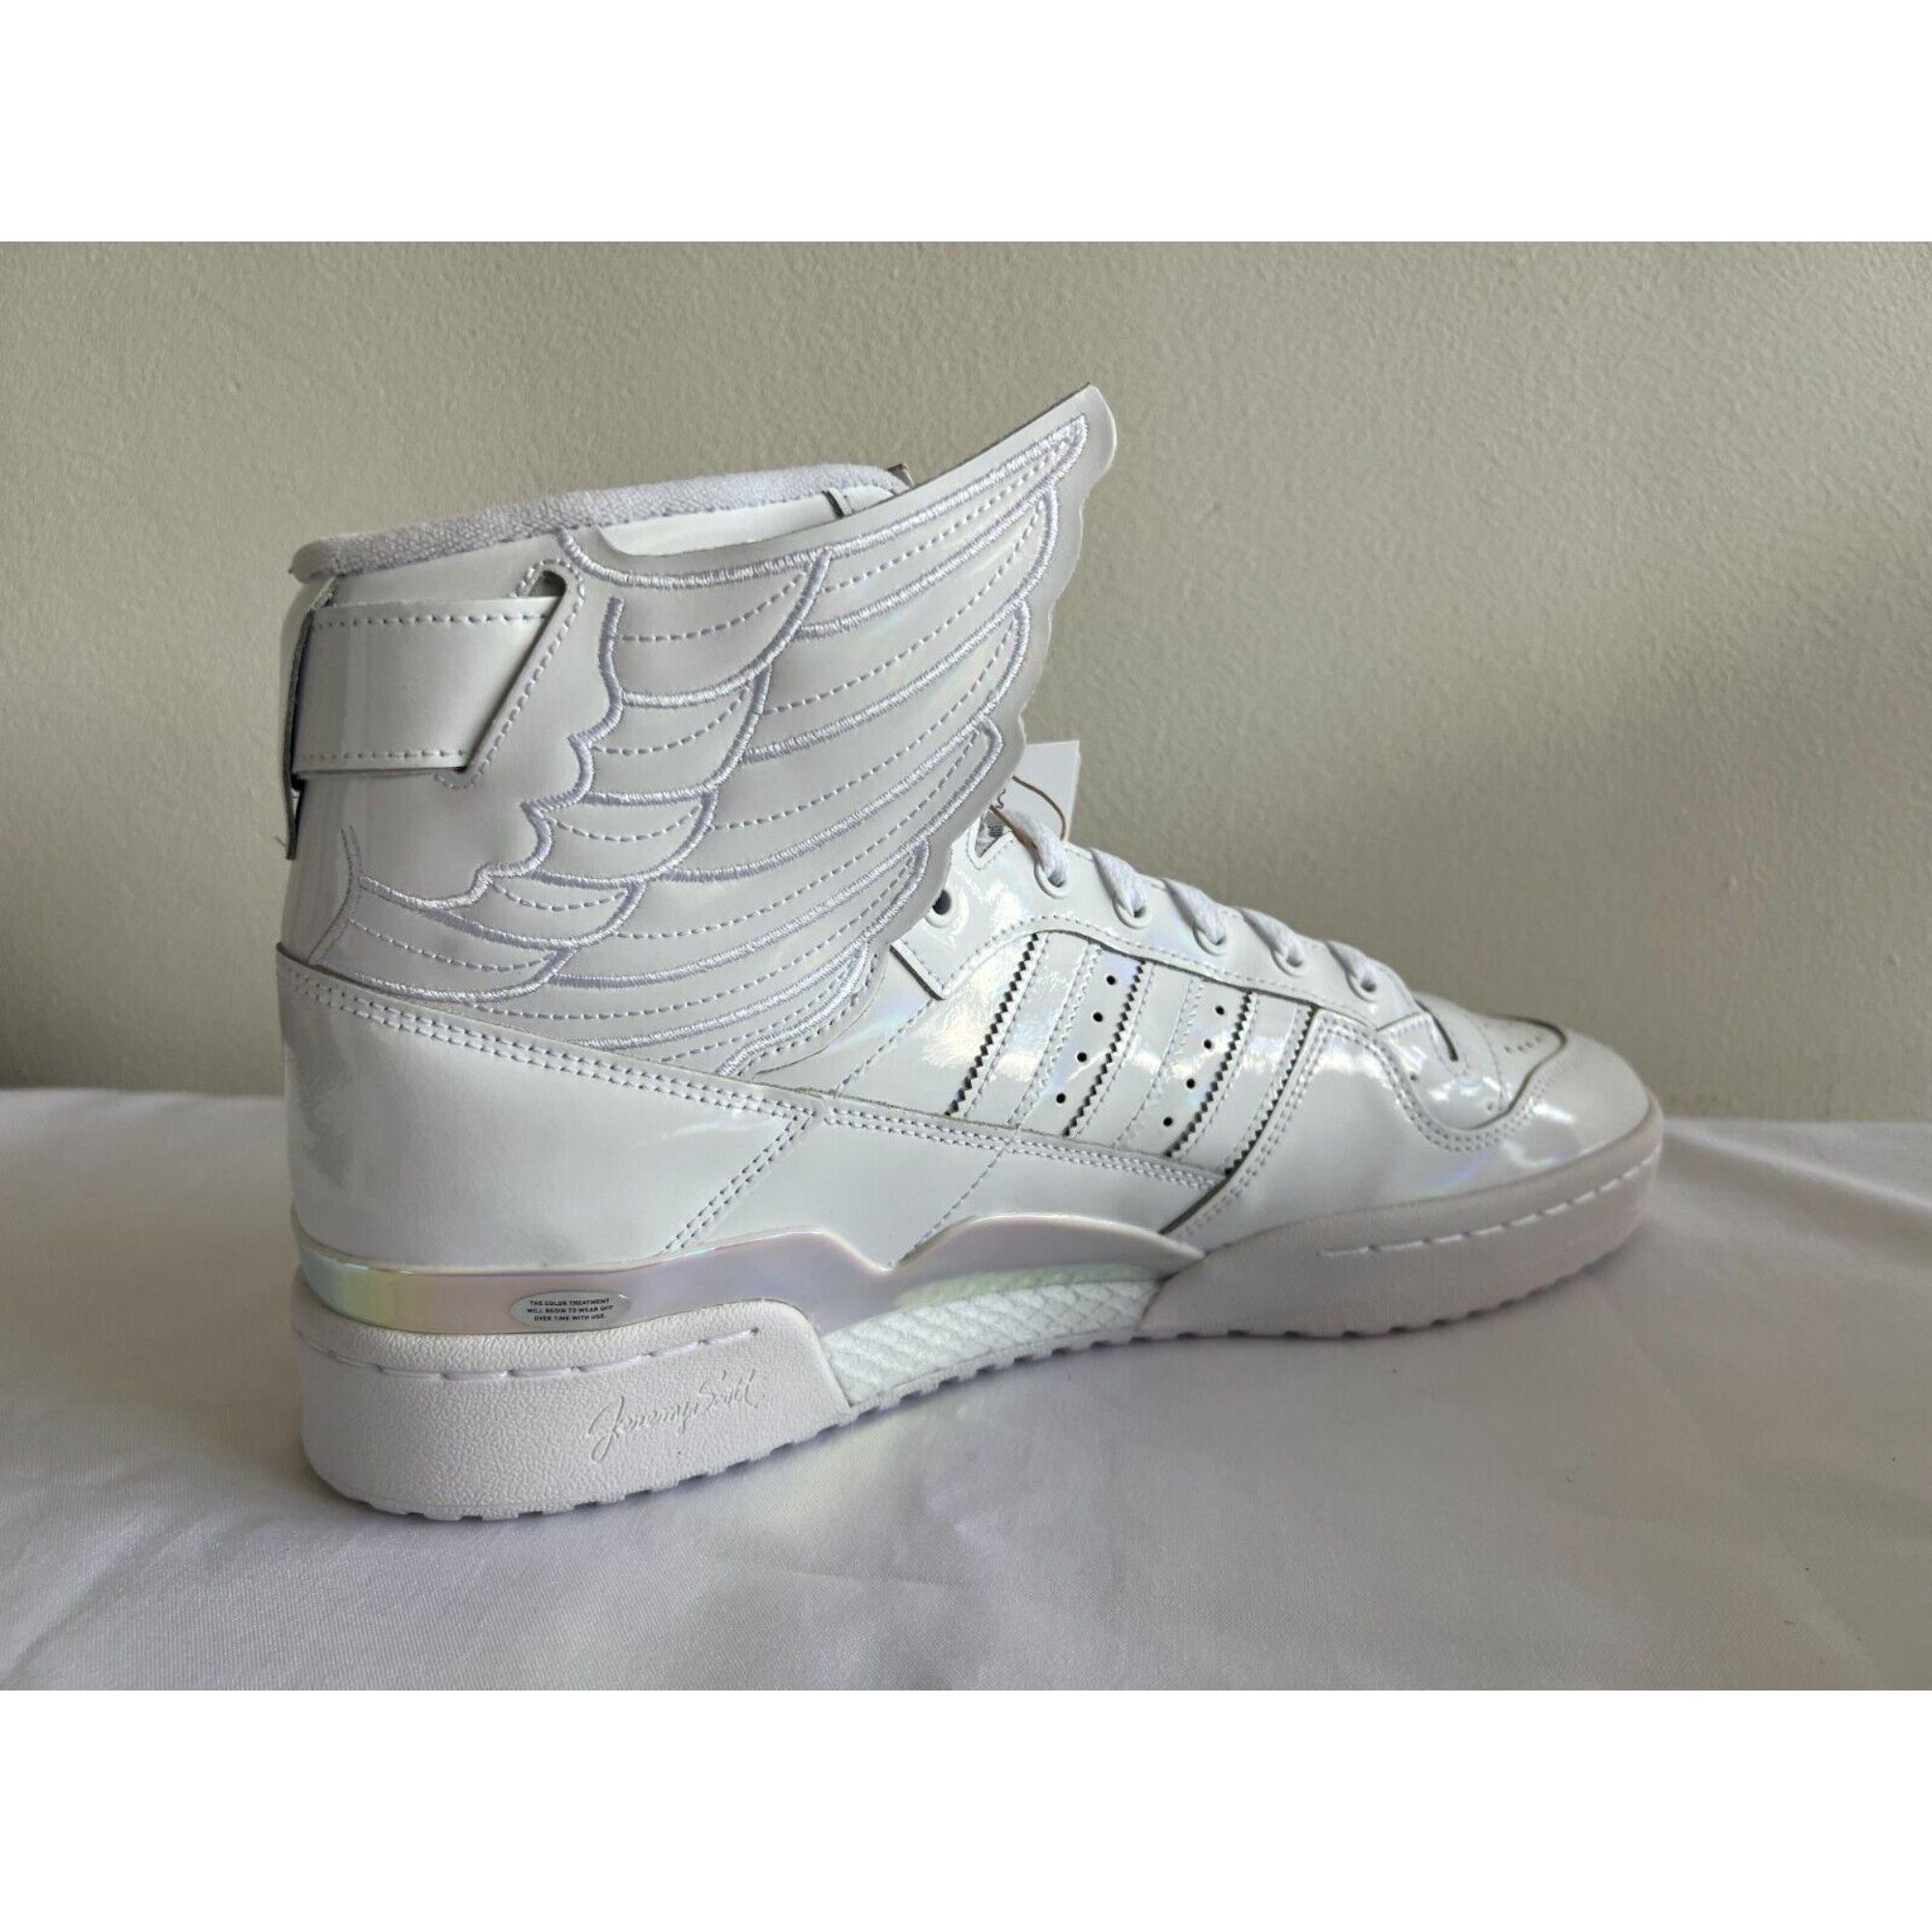 Adidas Originals ObyO Jeremy Scott Wings 4.0 Core Cloud White / Black Sneakers

Additional Information:
Material: Synthetic Leather
Color: White
Size: 14
Style: White
Pattern: Solid
Condition: Brand new in the original box*
Available in other size